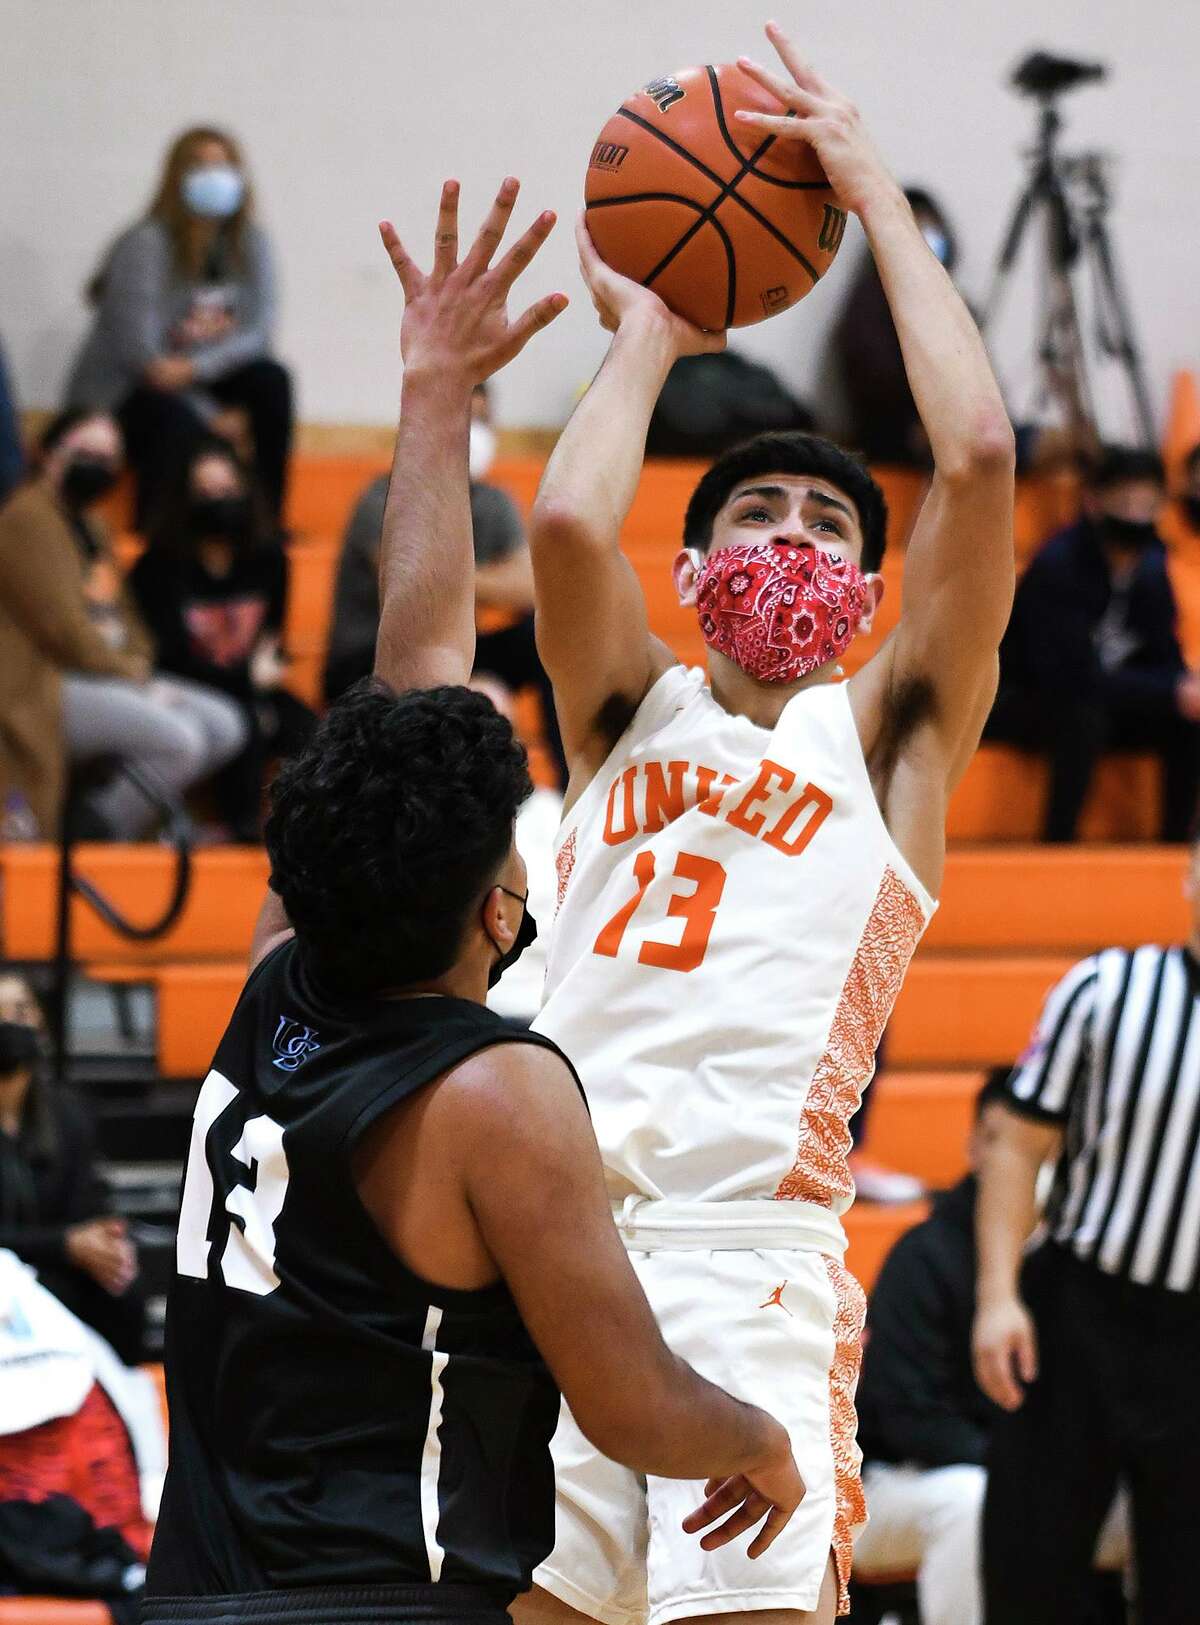 Carlos Puerto and the United Longhorns seek to snap a three-game skid as they travel to Eagle Pass on Tuesday.